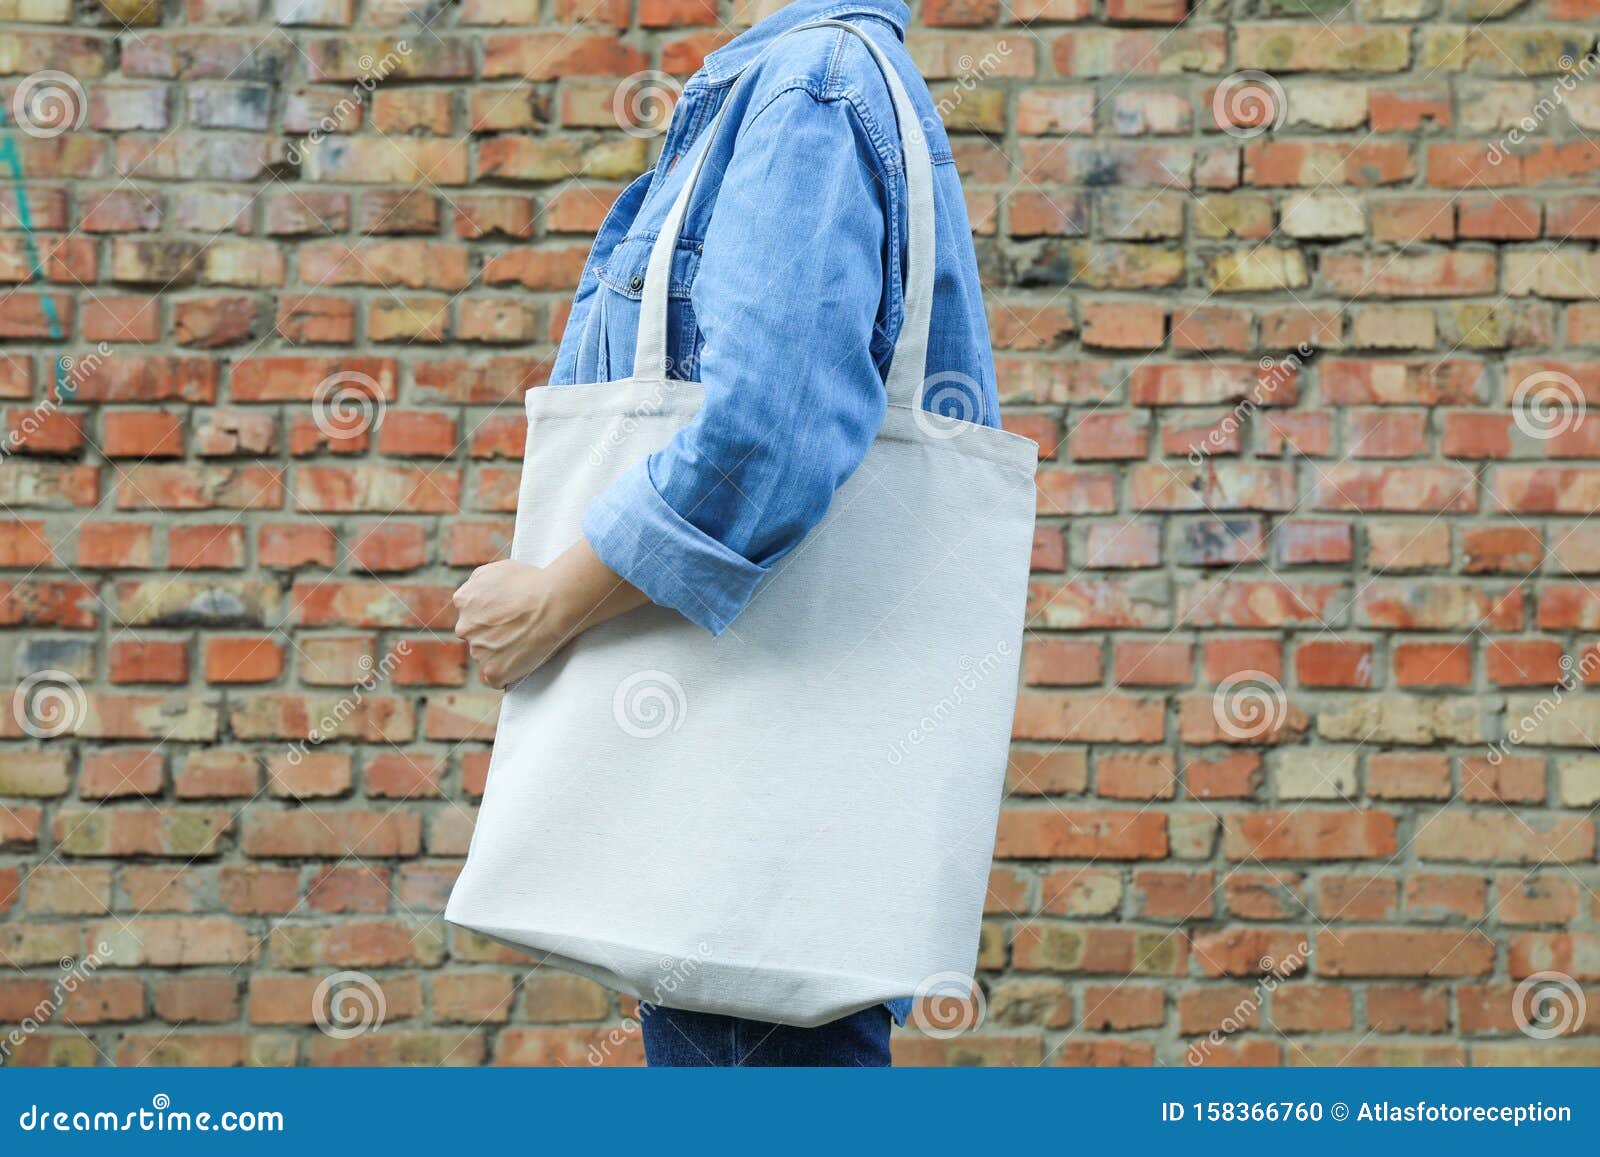 Young Woman Holding Tote Bag Against Brick Wall Stock 